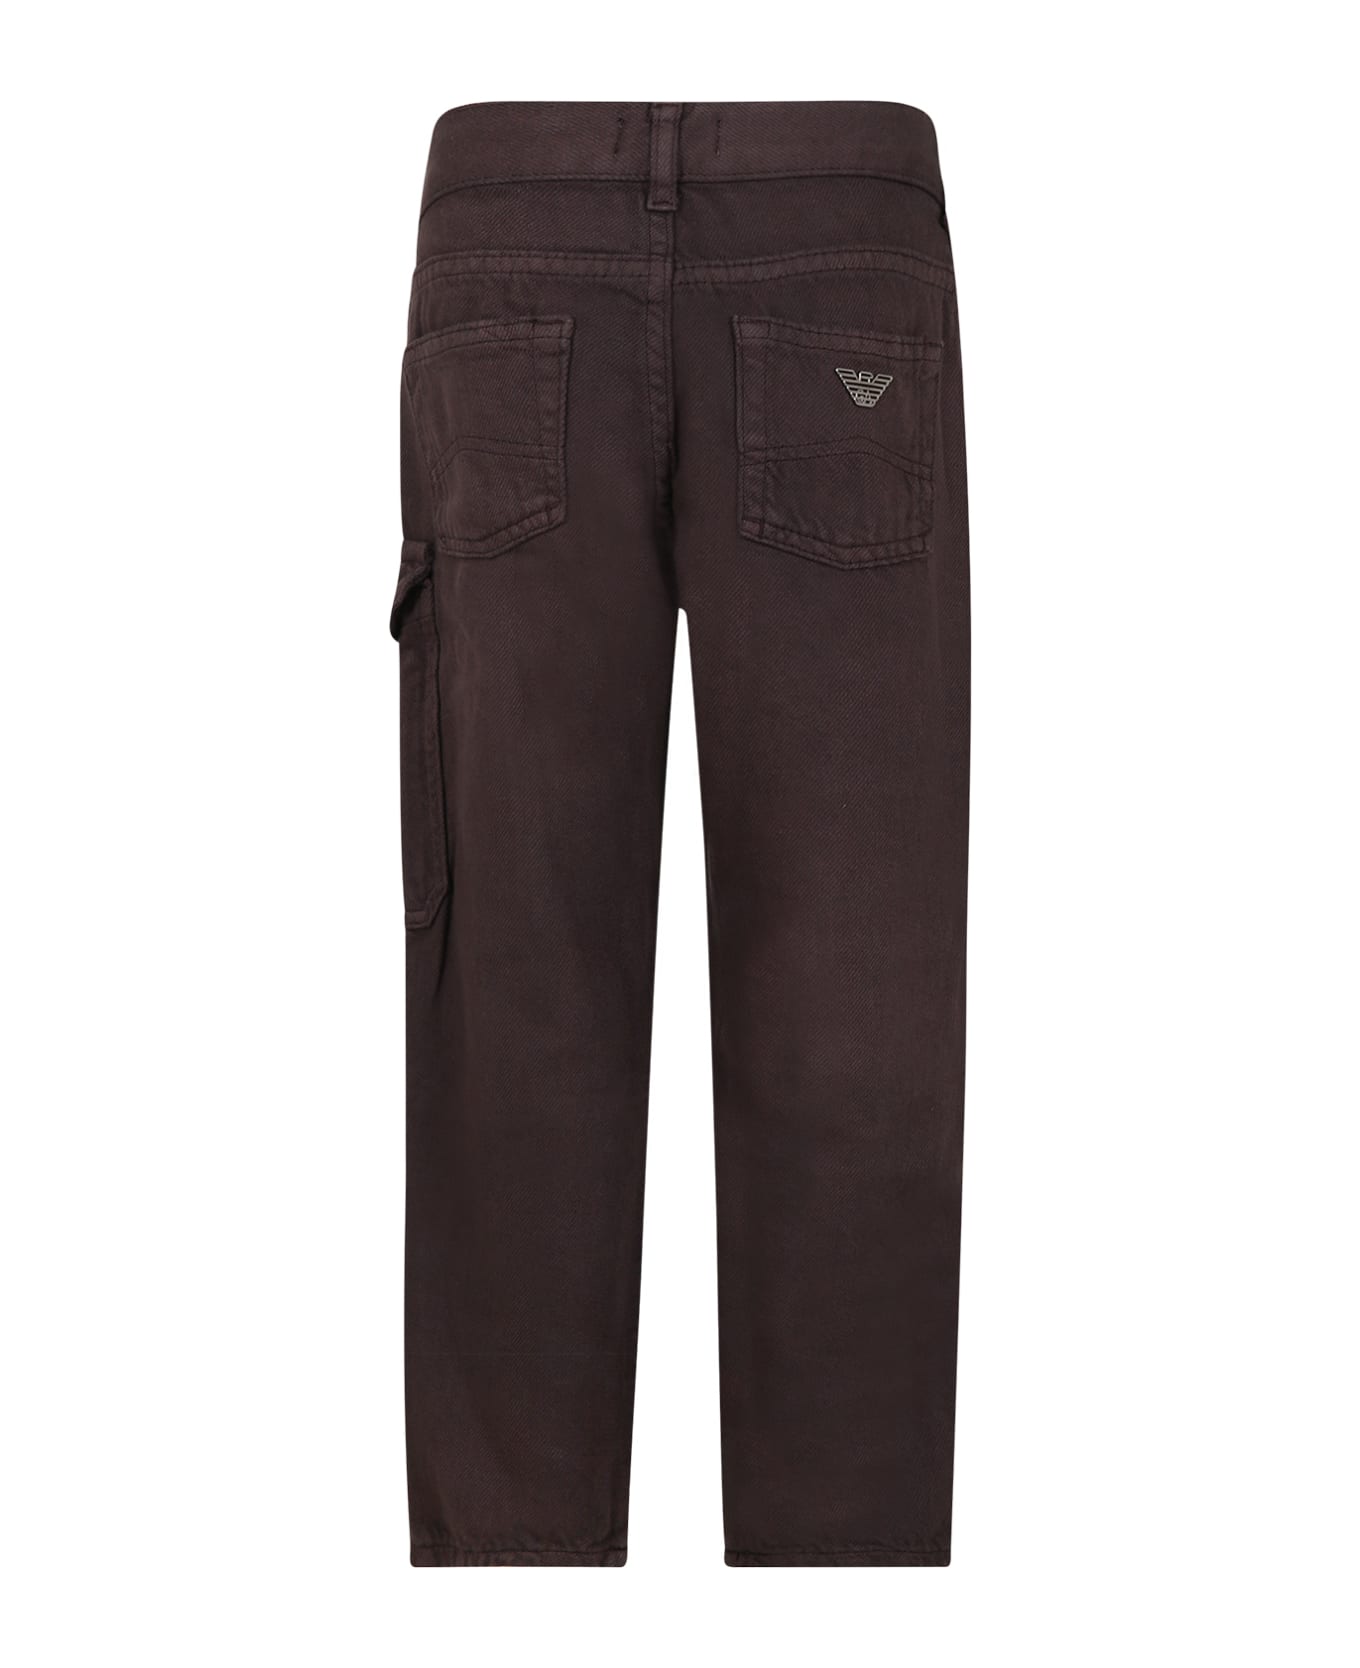 Emporio Armani Brown Trousers For Boy With Eagle - China Ting ボトムス